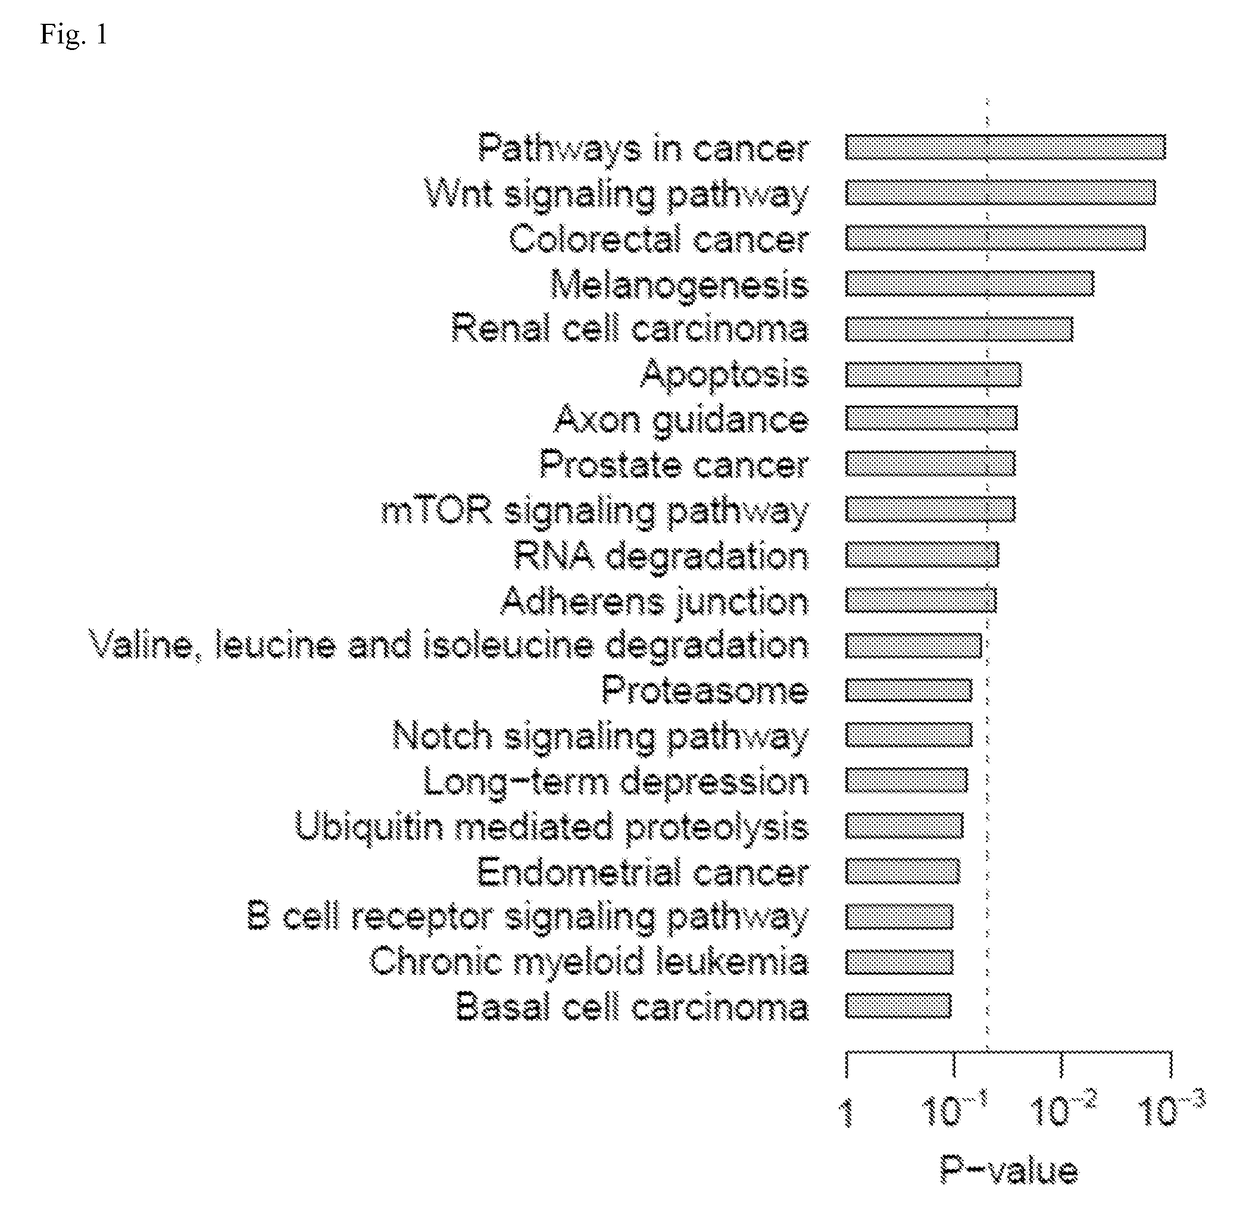 Systems and methods for characterizing cancer